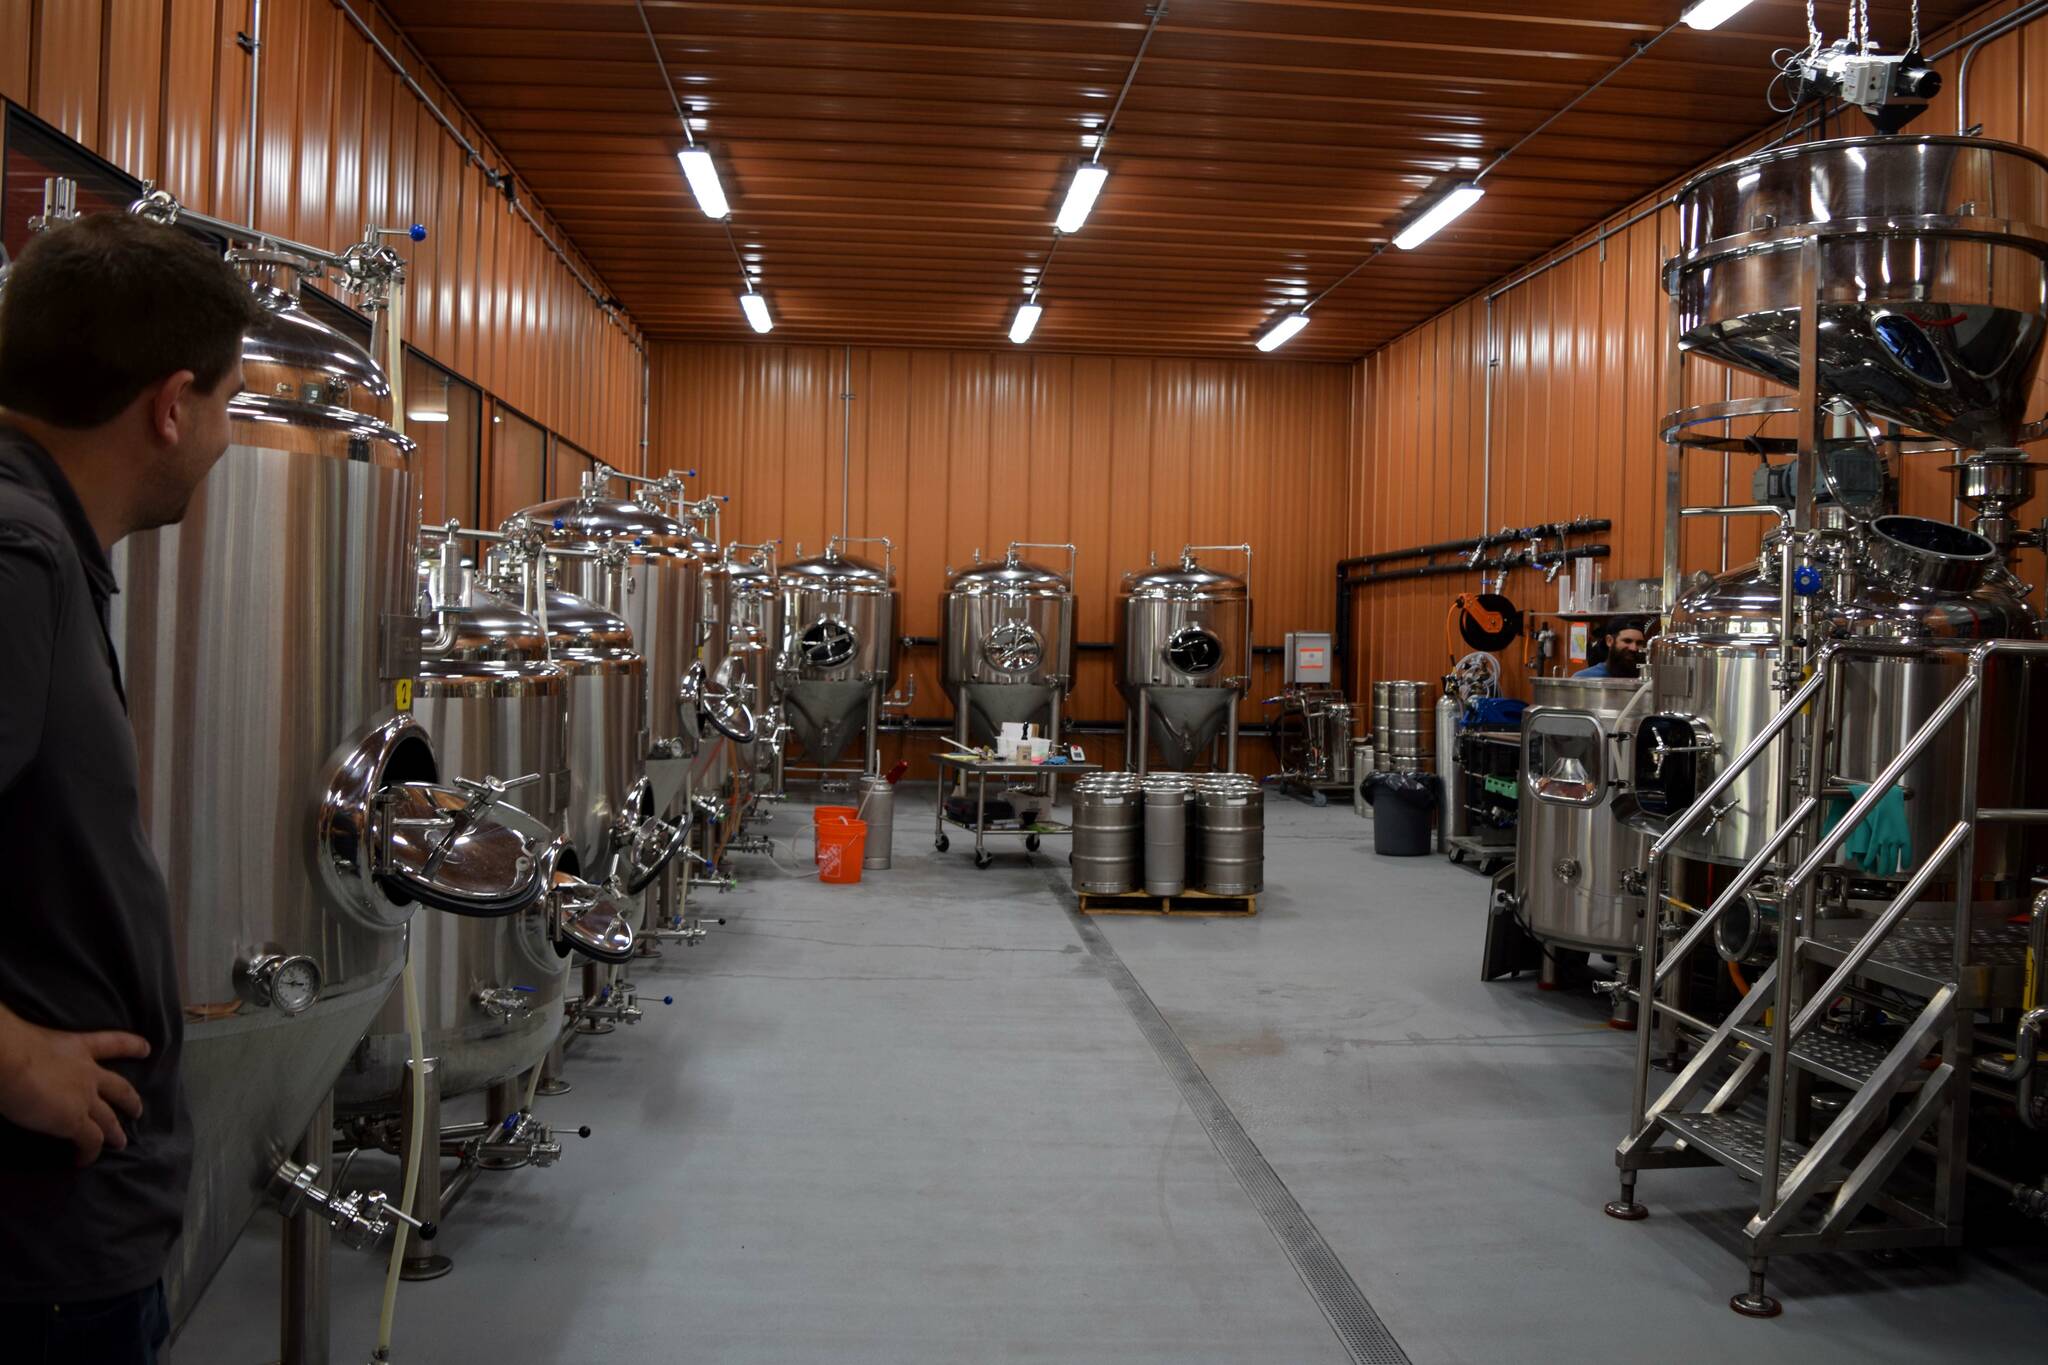 The new Remlinger Farms’ brewery. The brewery is open 12 to 8 p.m. Wednesday through Sunday at 32510 N.E. 32nd Street in Carnation. Photo by Conor Wilson/Valley Record.